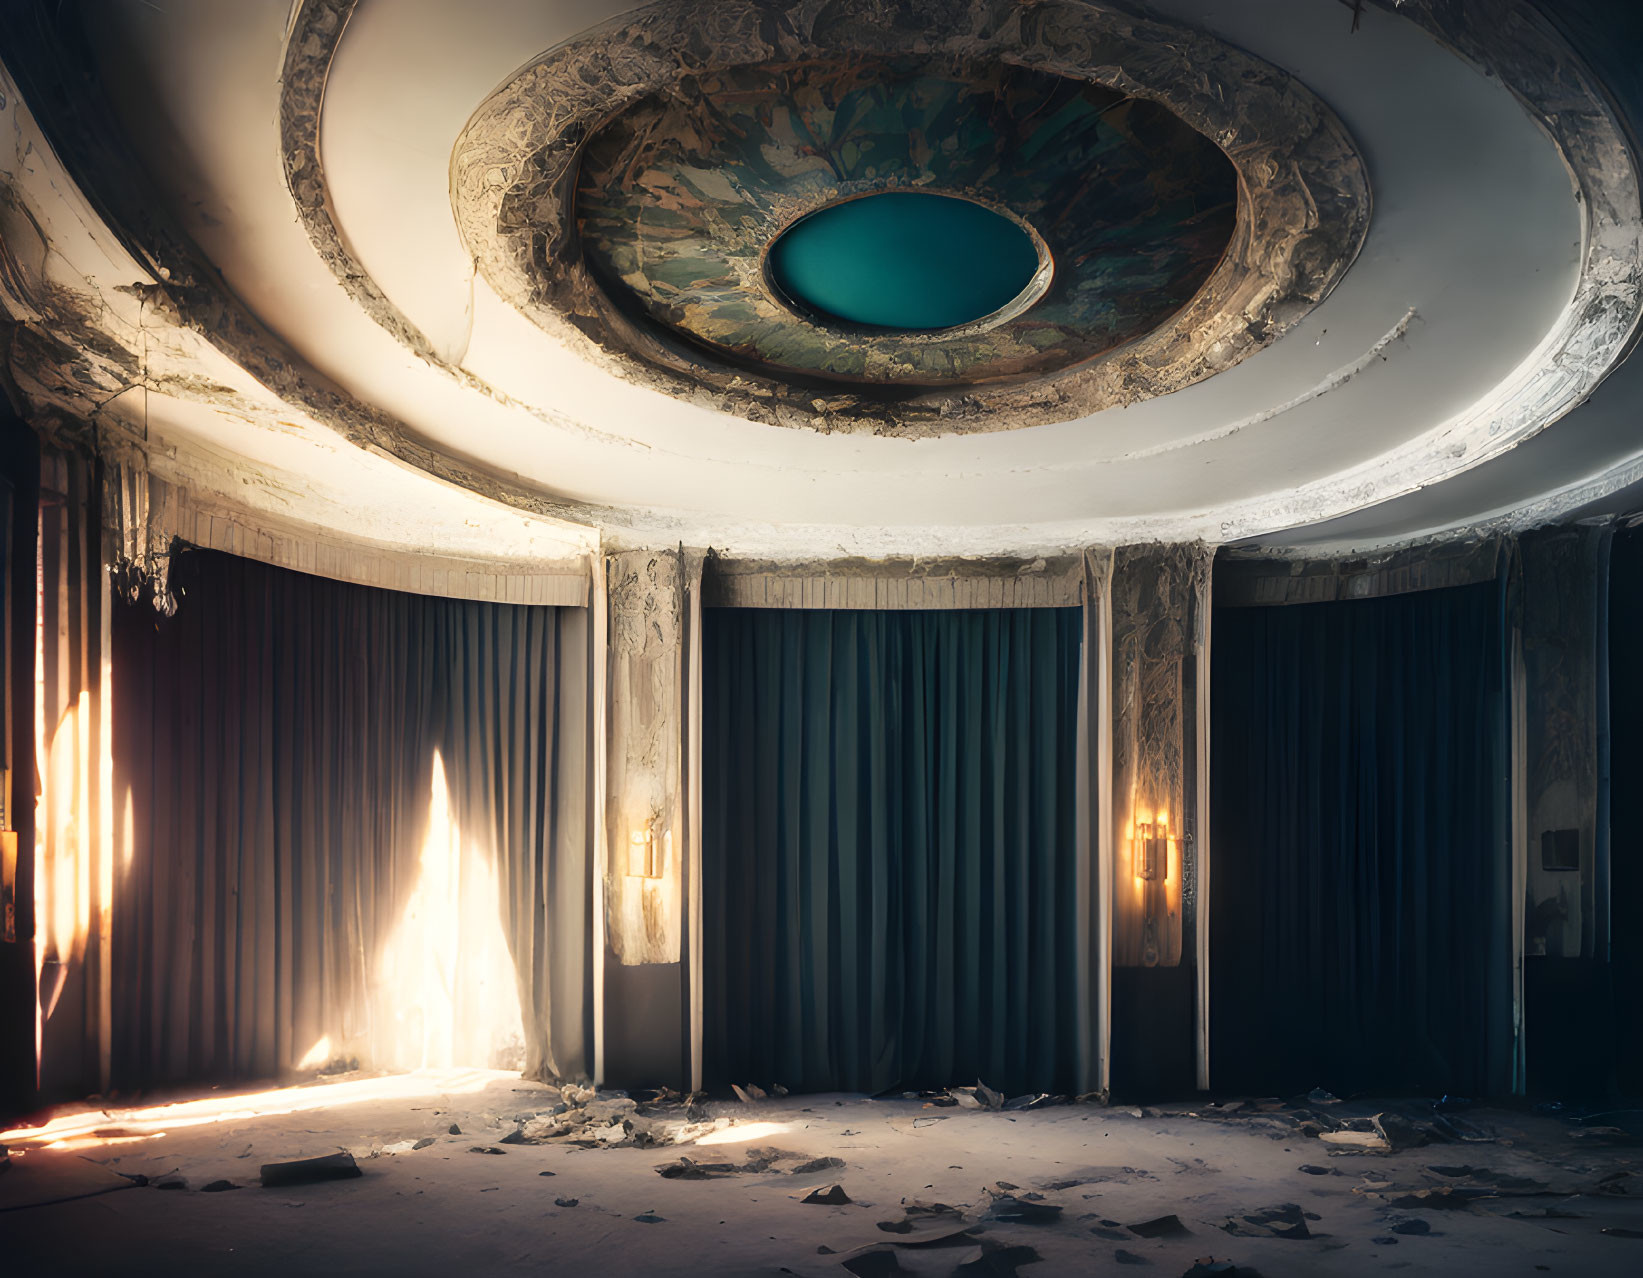 Decaying room with circular ceiling painting and shafts of light